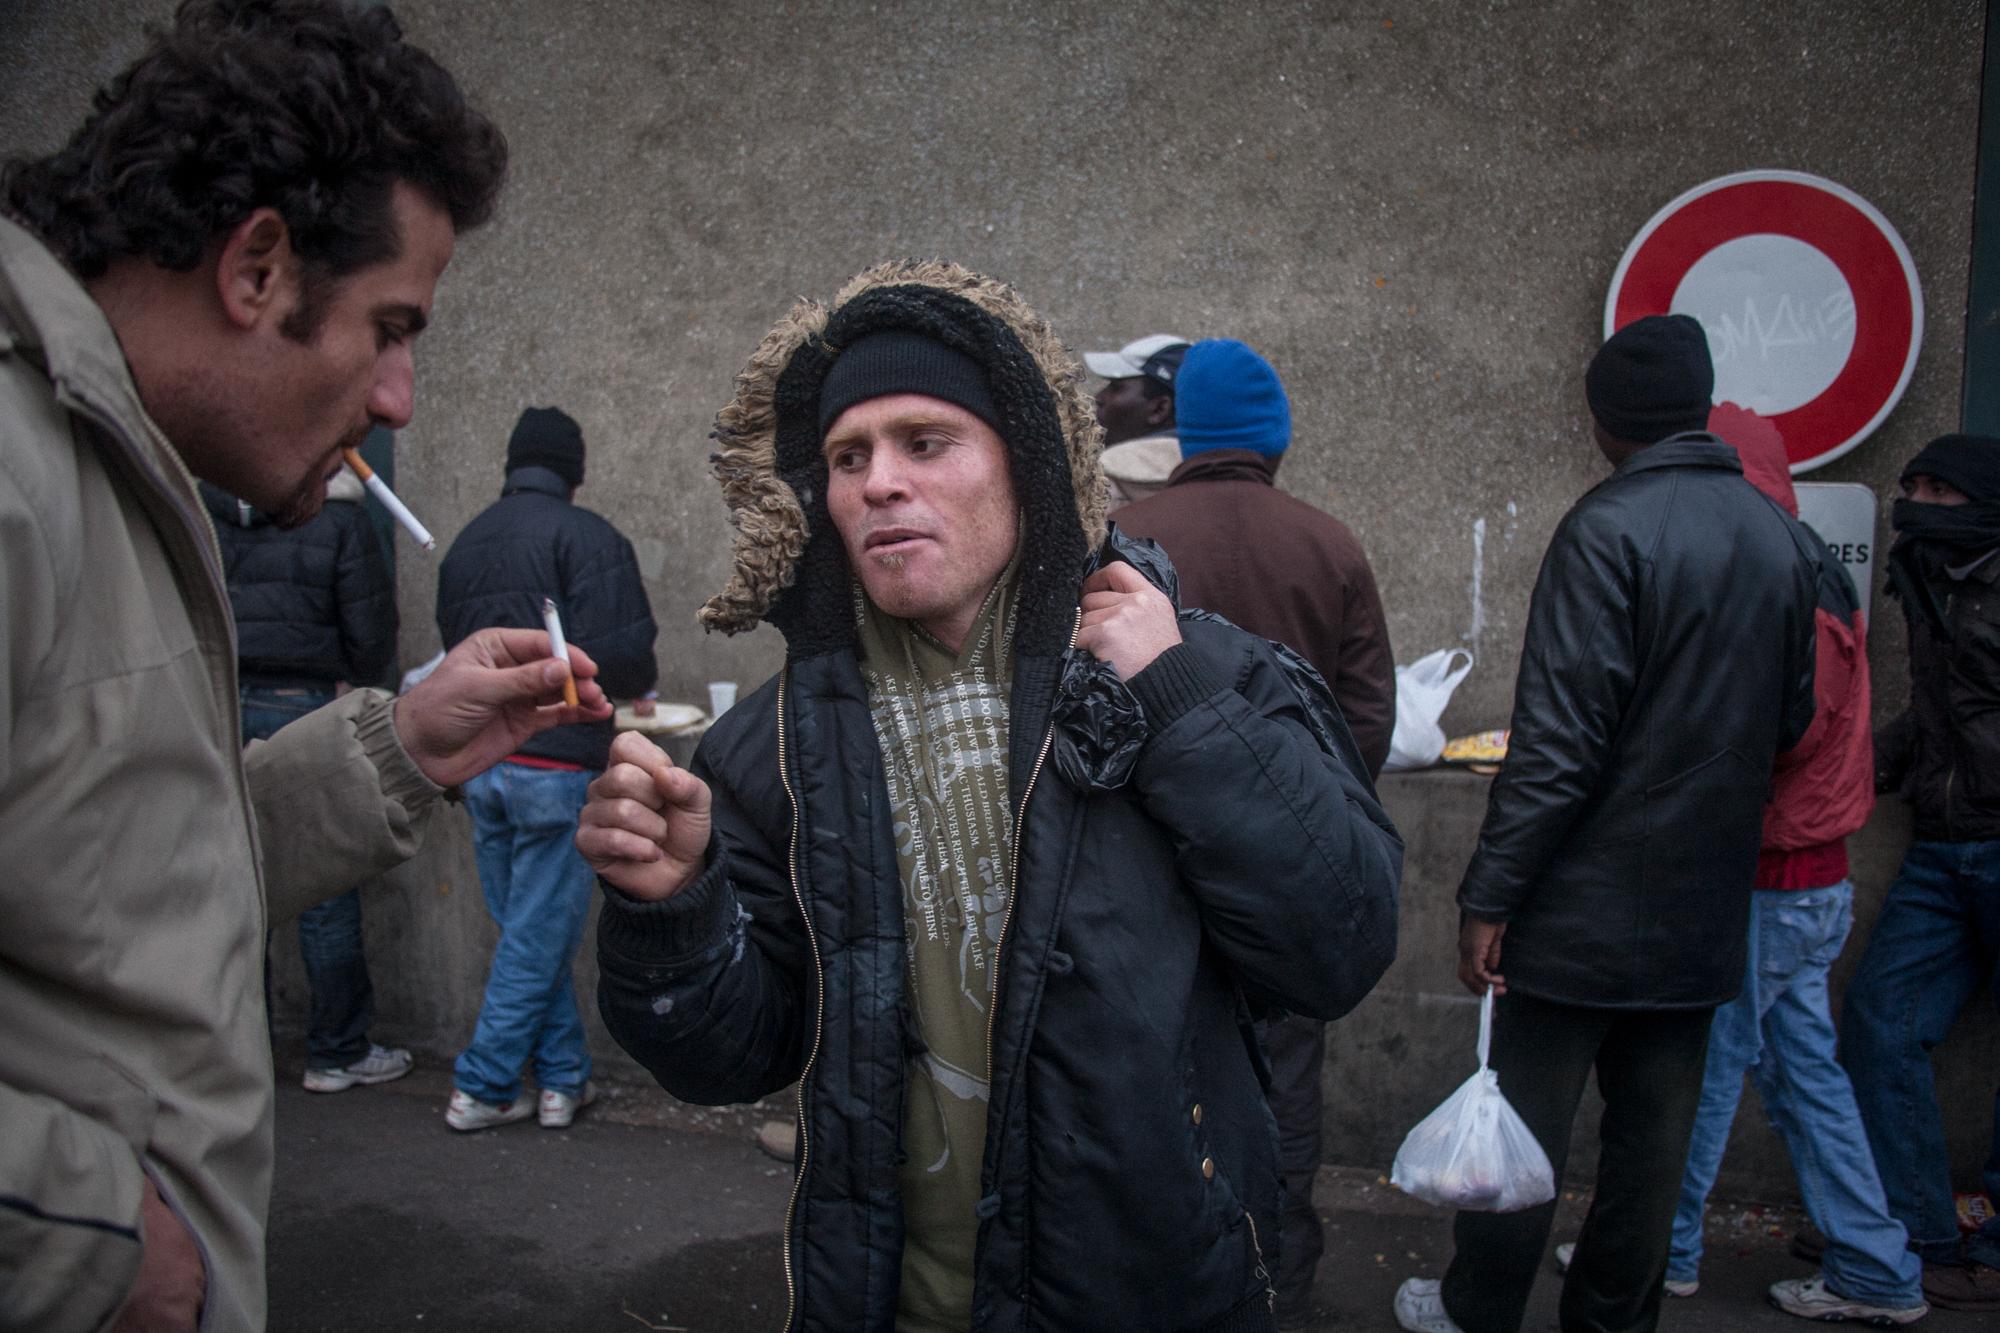 Migrants in Calais, France (2008) - Kurdish immigrant after daily evening meal given by the...